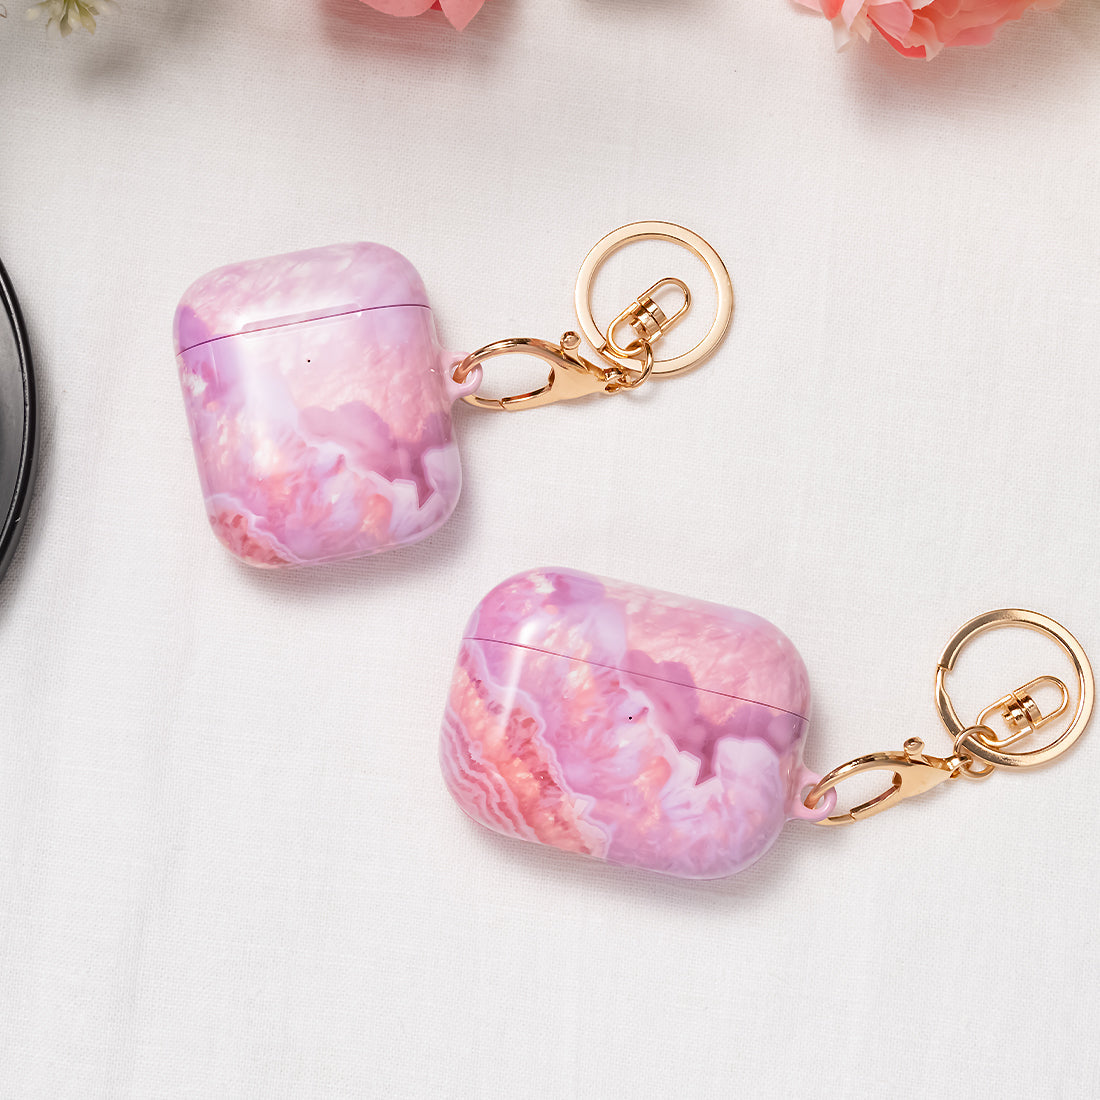 Misty Rose Coral | Custom AirPods Case